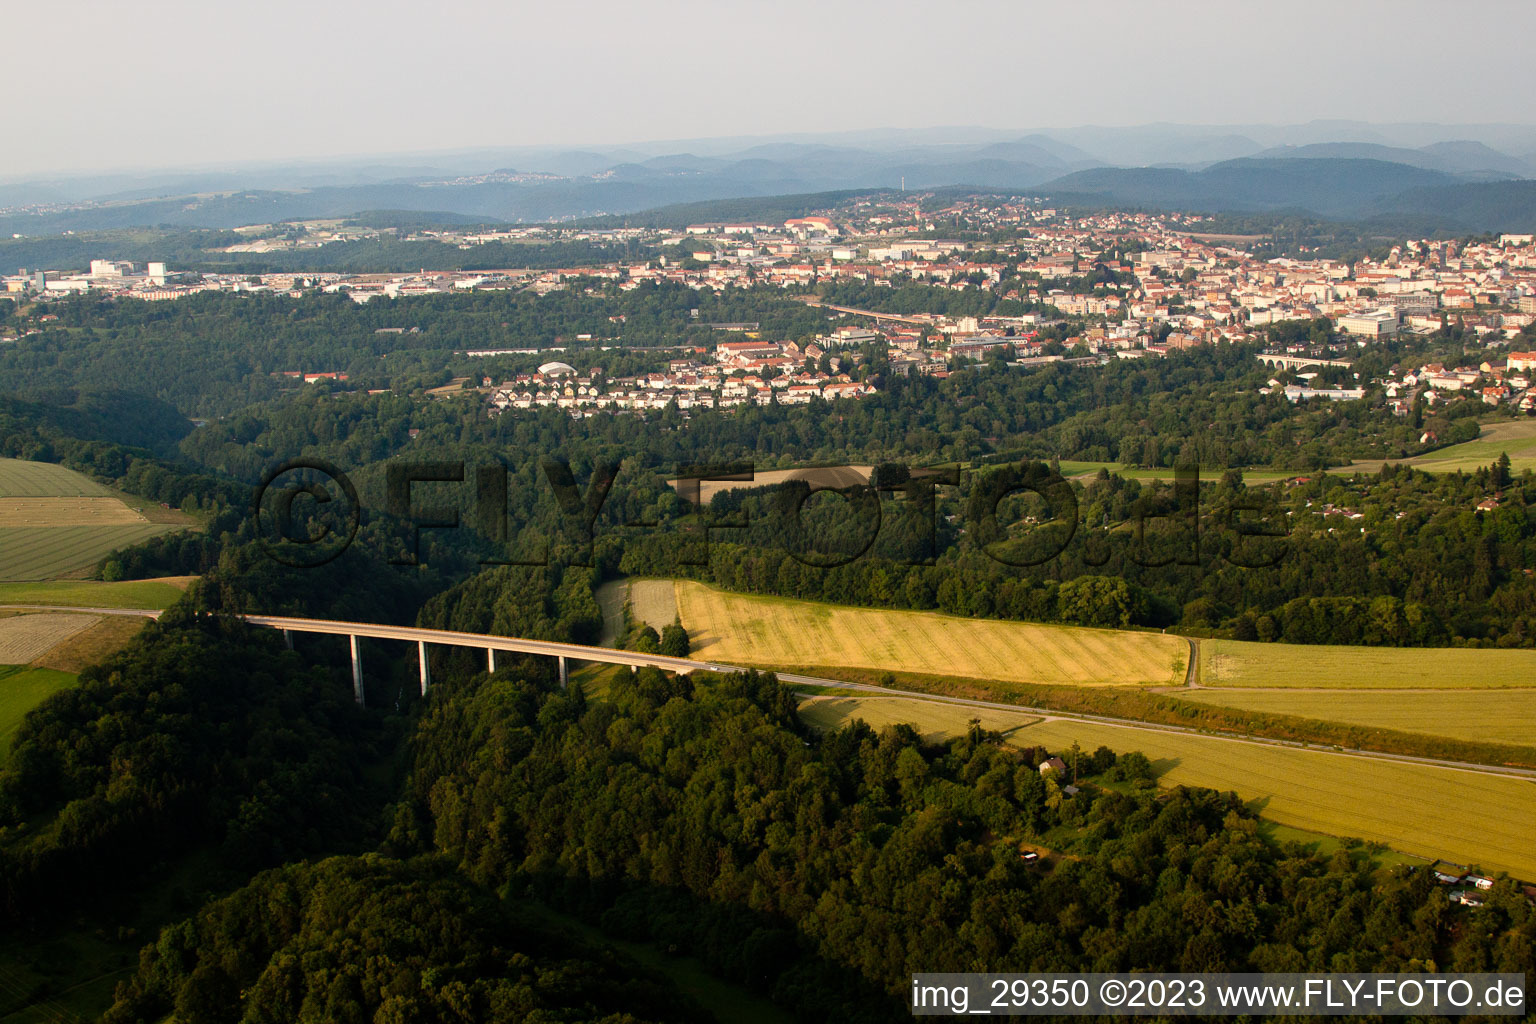 Aerial view of Pirmasens in the state Rhineland-Palatinate, Germany